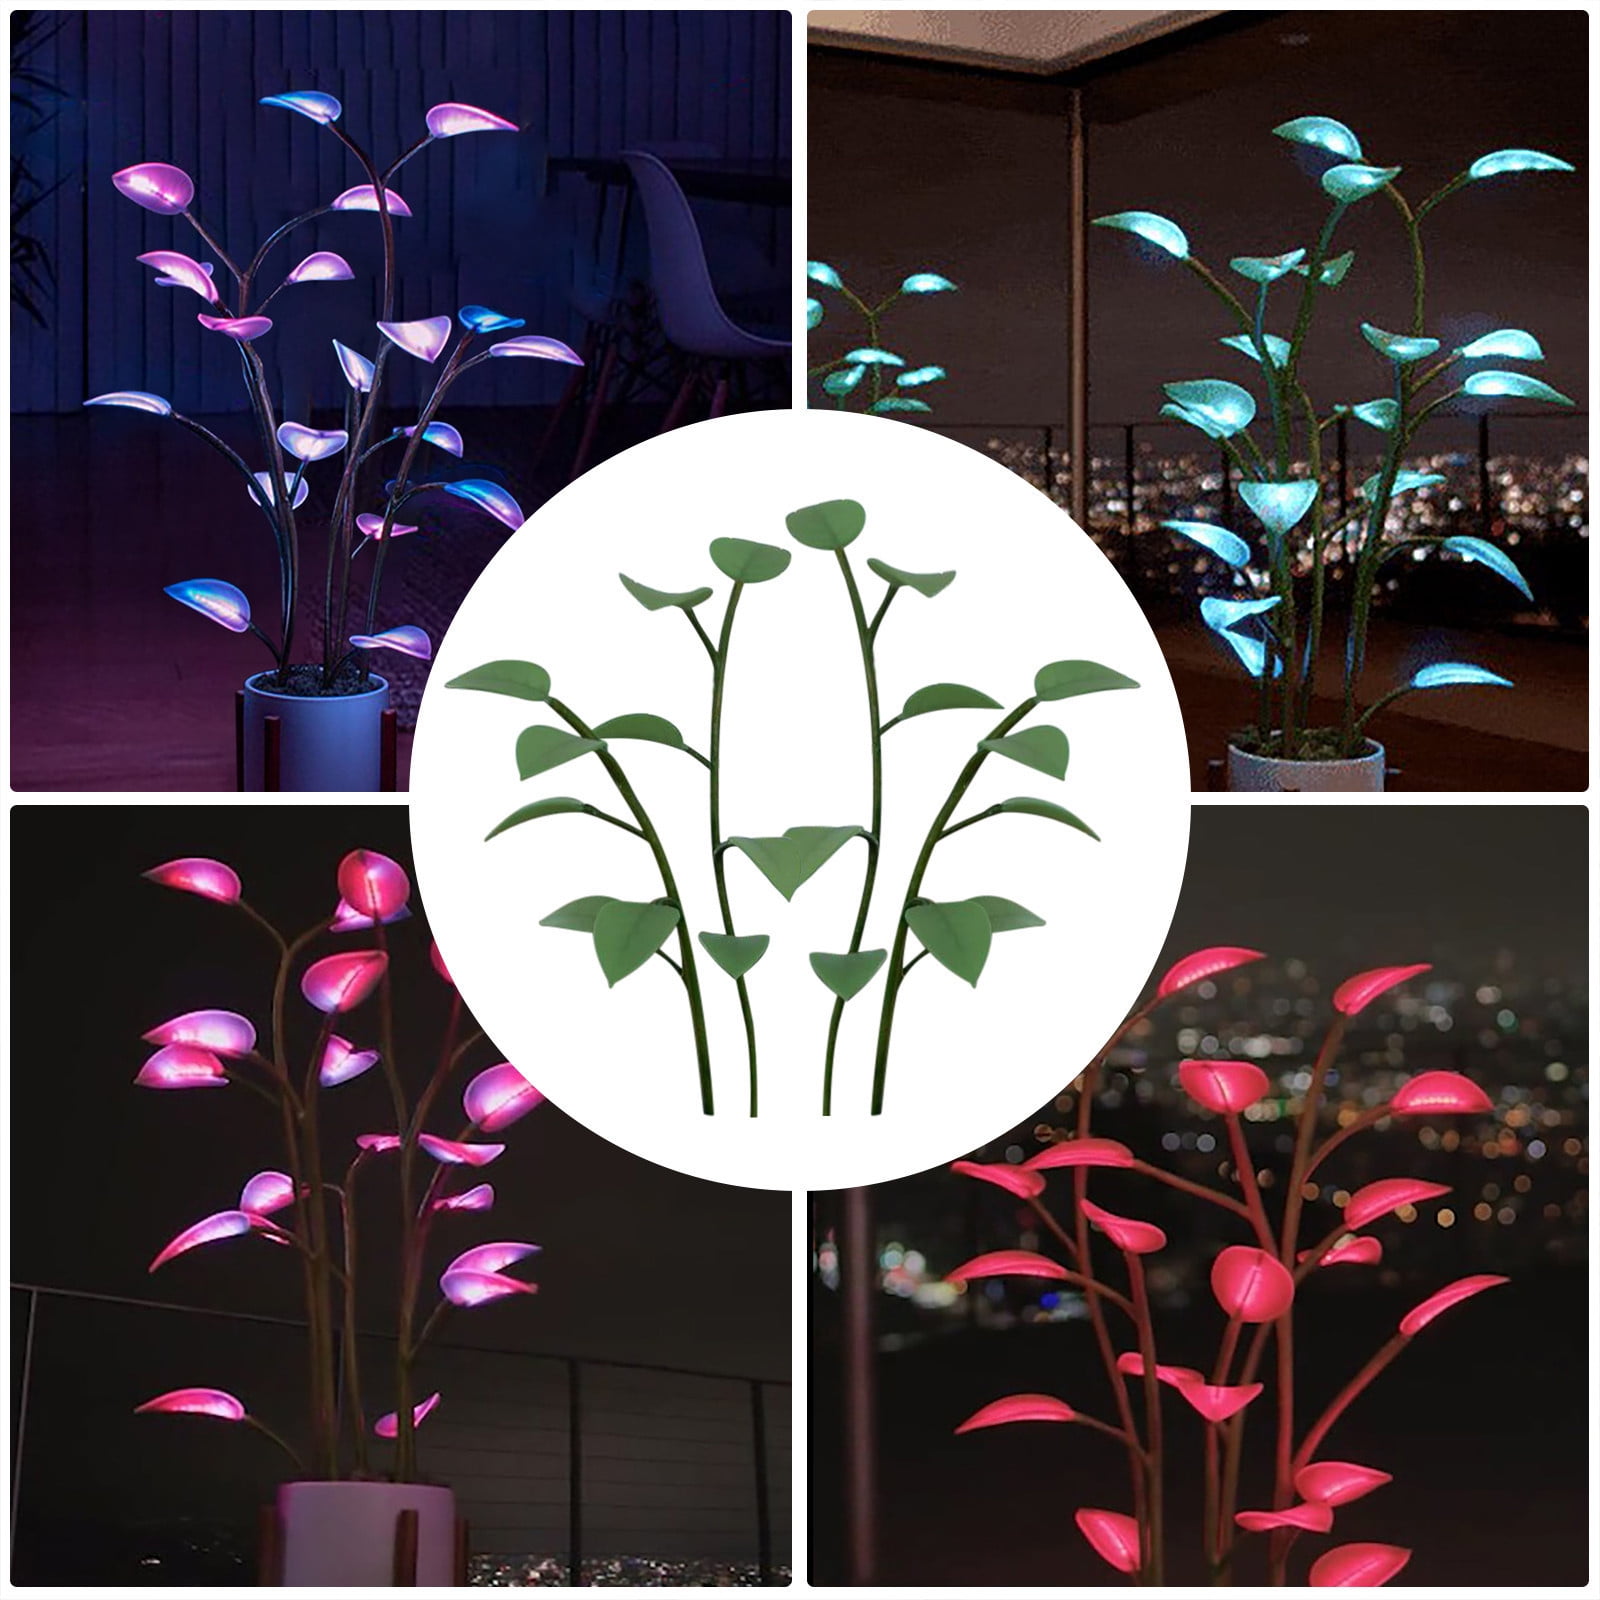 The Magical Led Houseplant Artificial Plants For Home Indoor Light ...